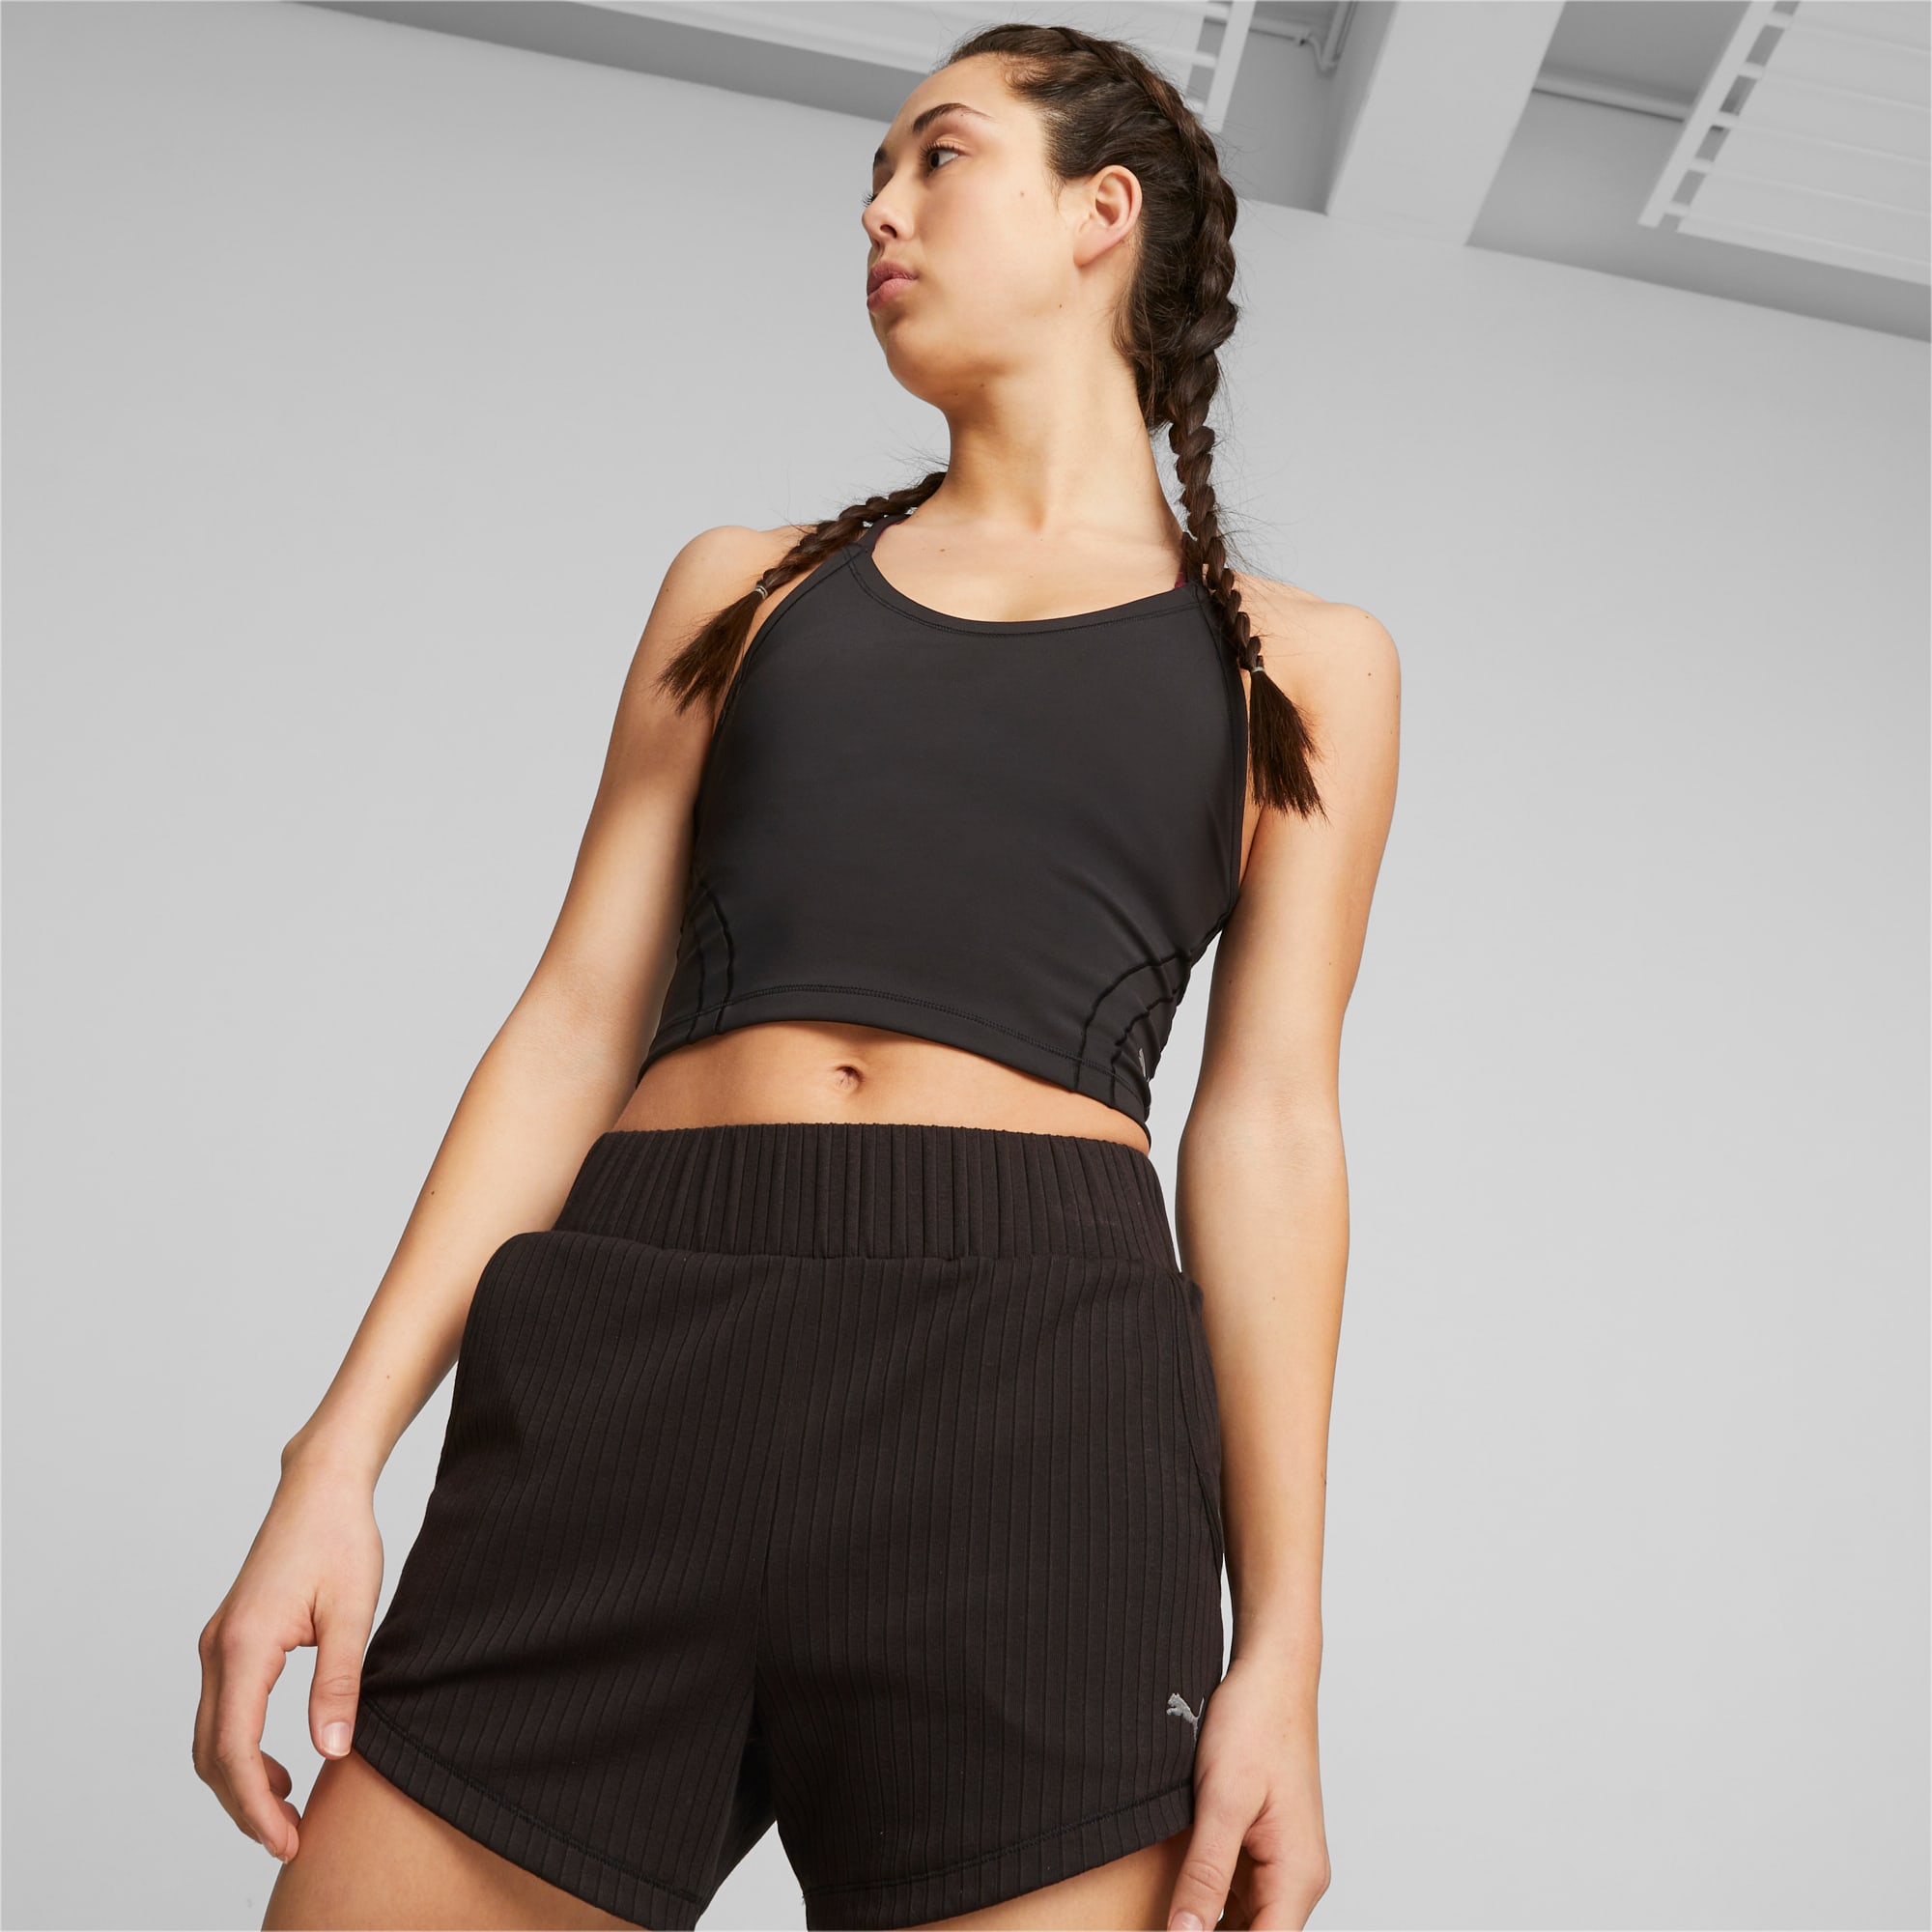 Cropped Workout Singlet for Women. Running Bare Elevate Crop Singlet